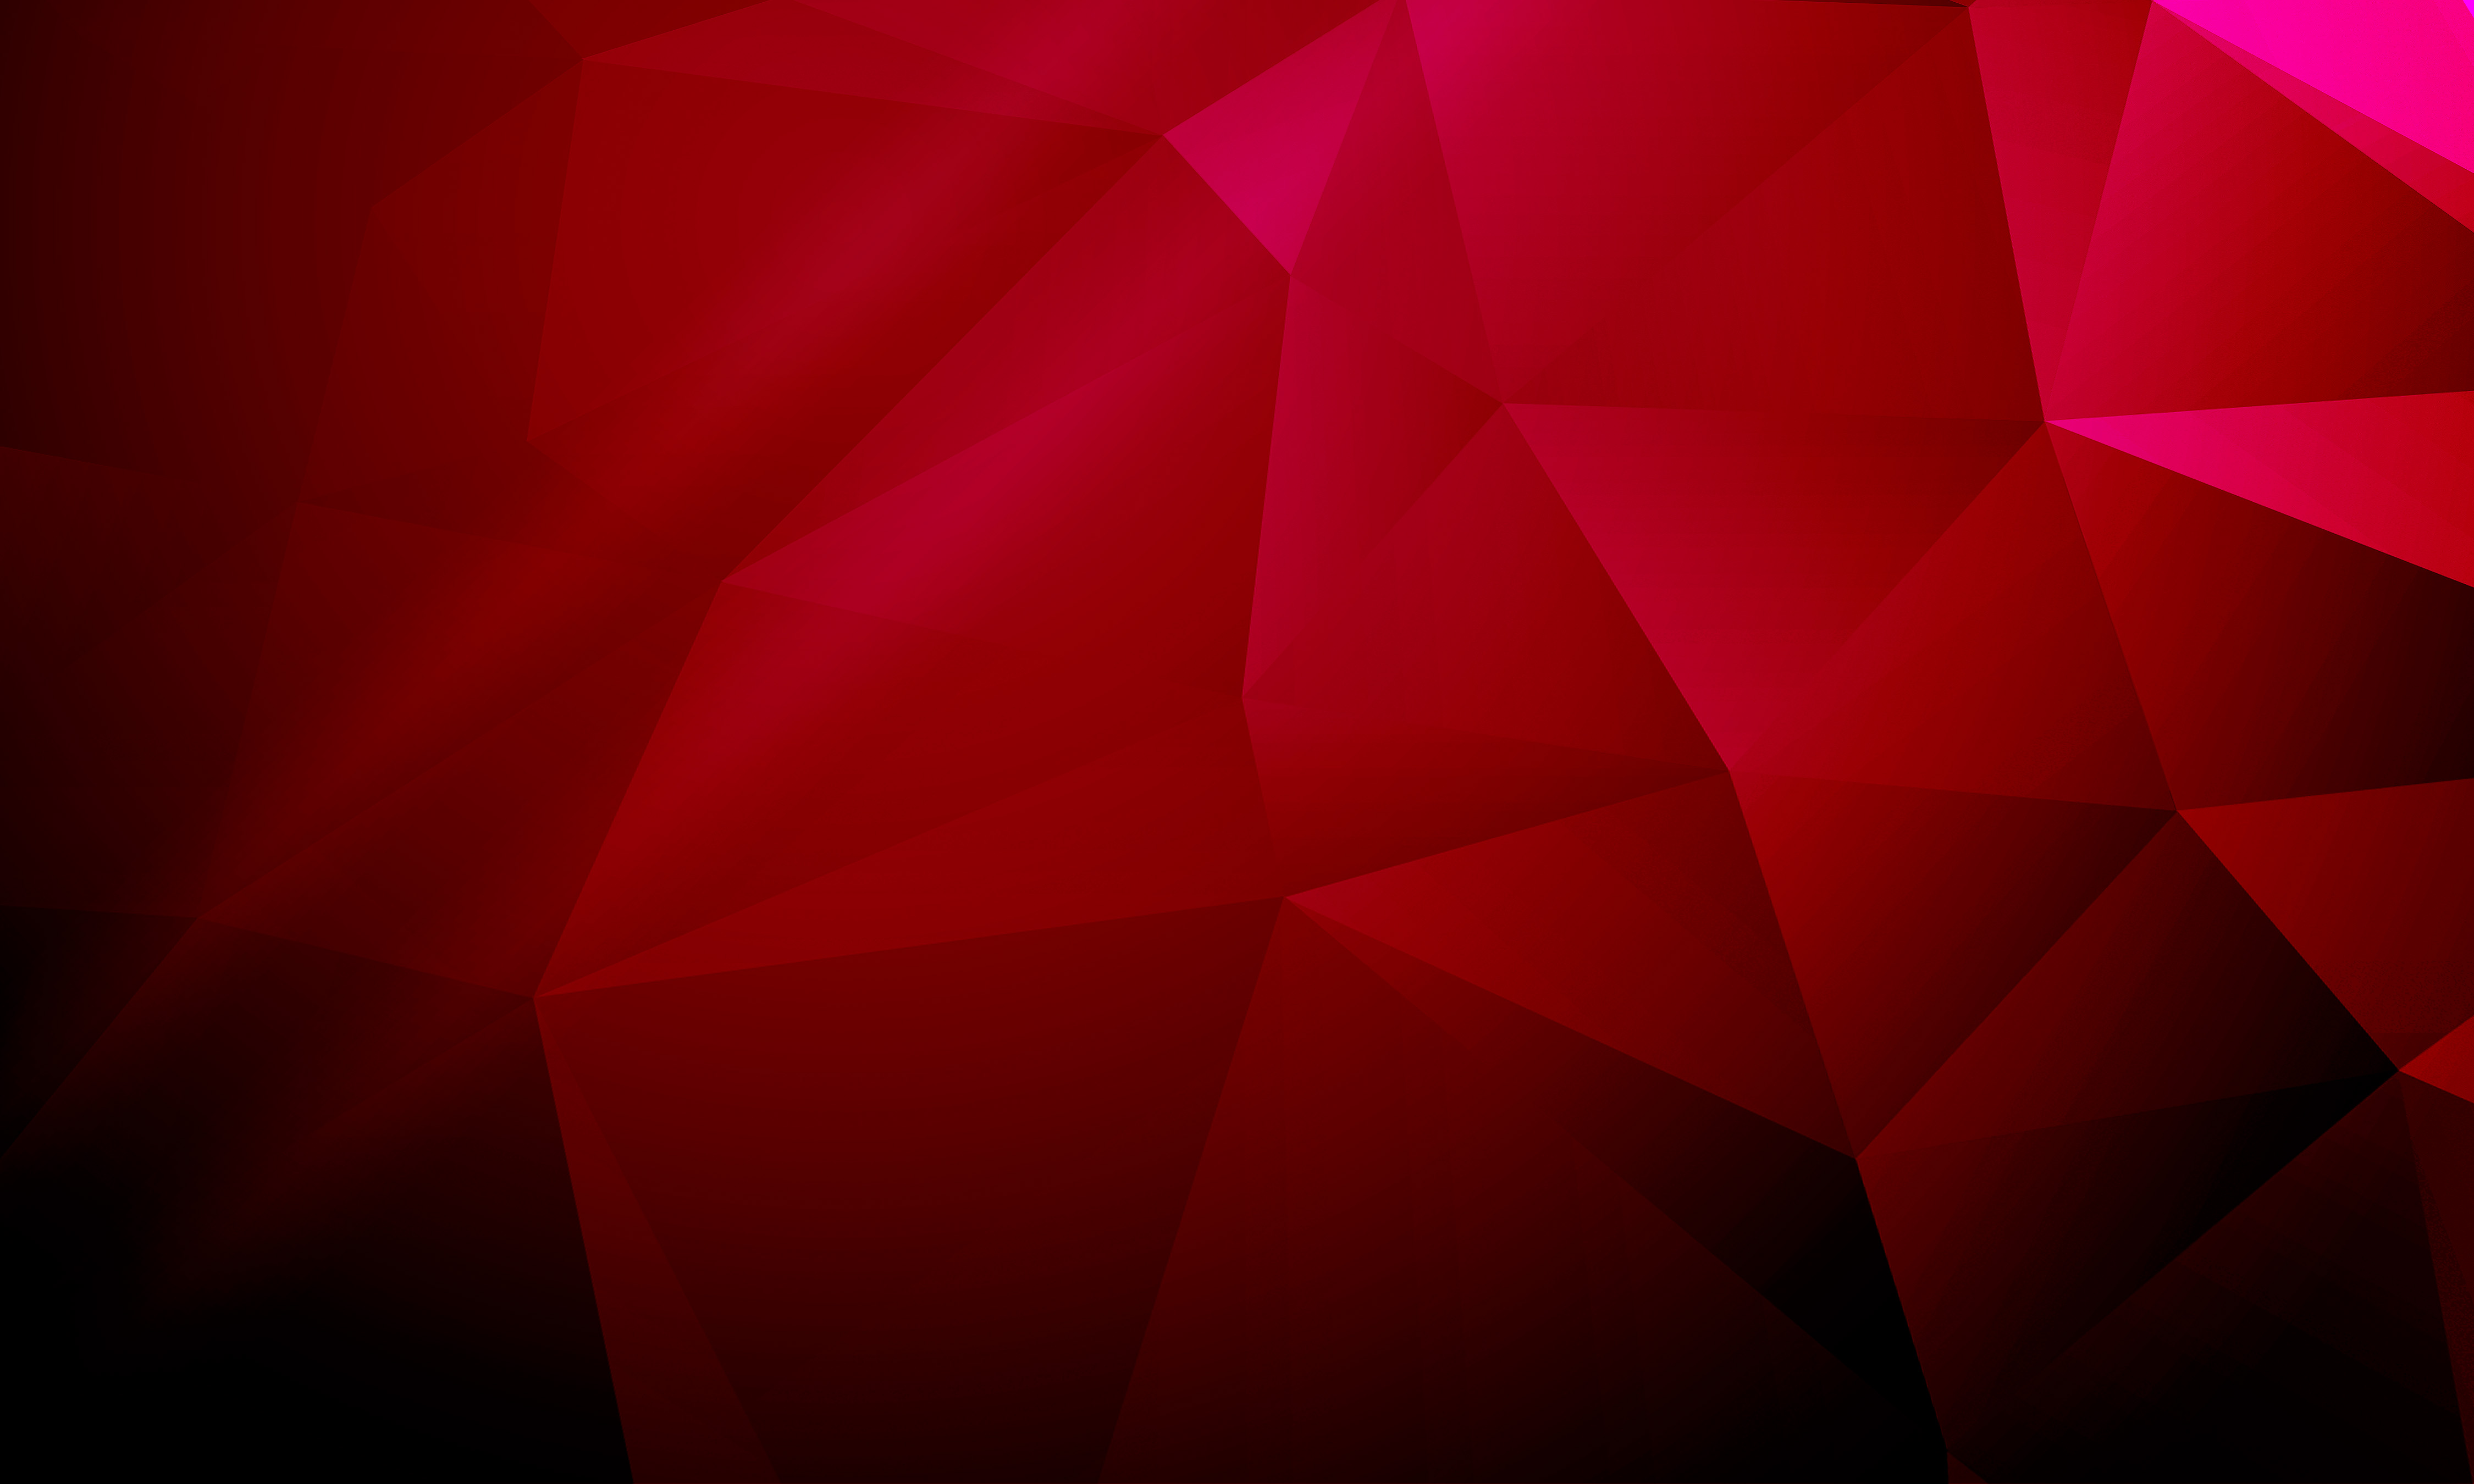 Abstract Triangle HD Wallpaper | Background Image